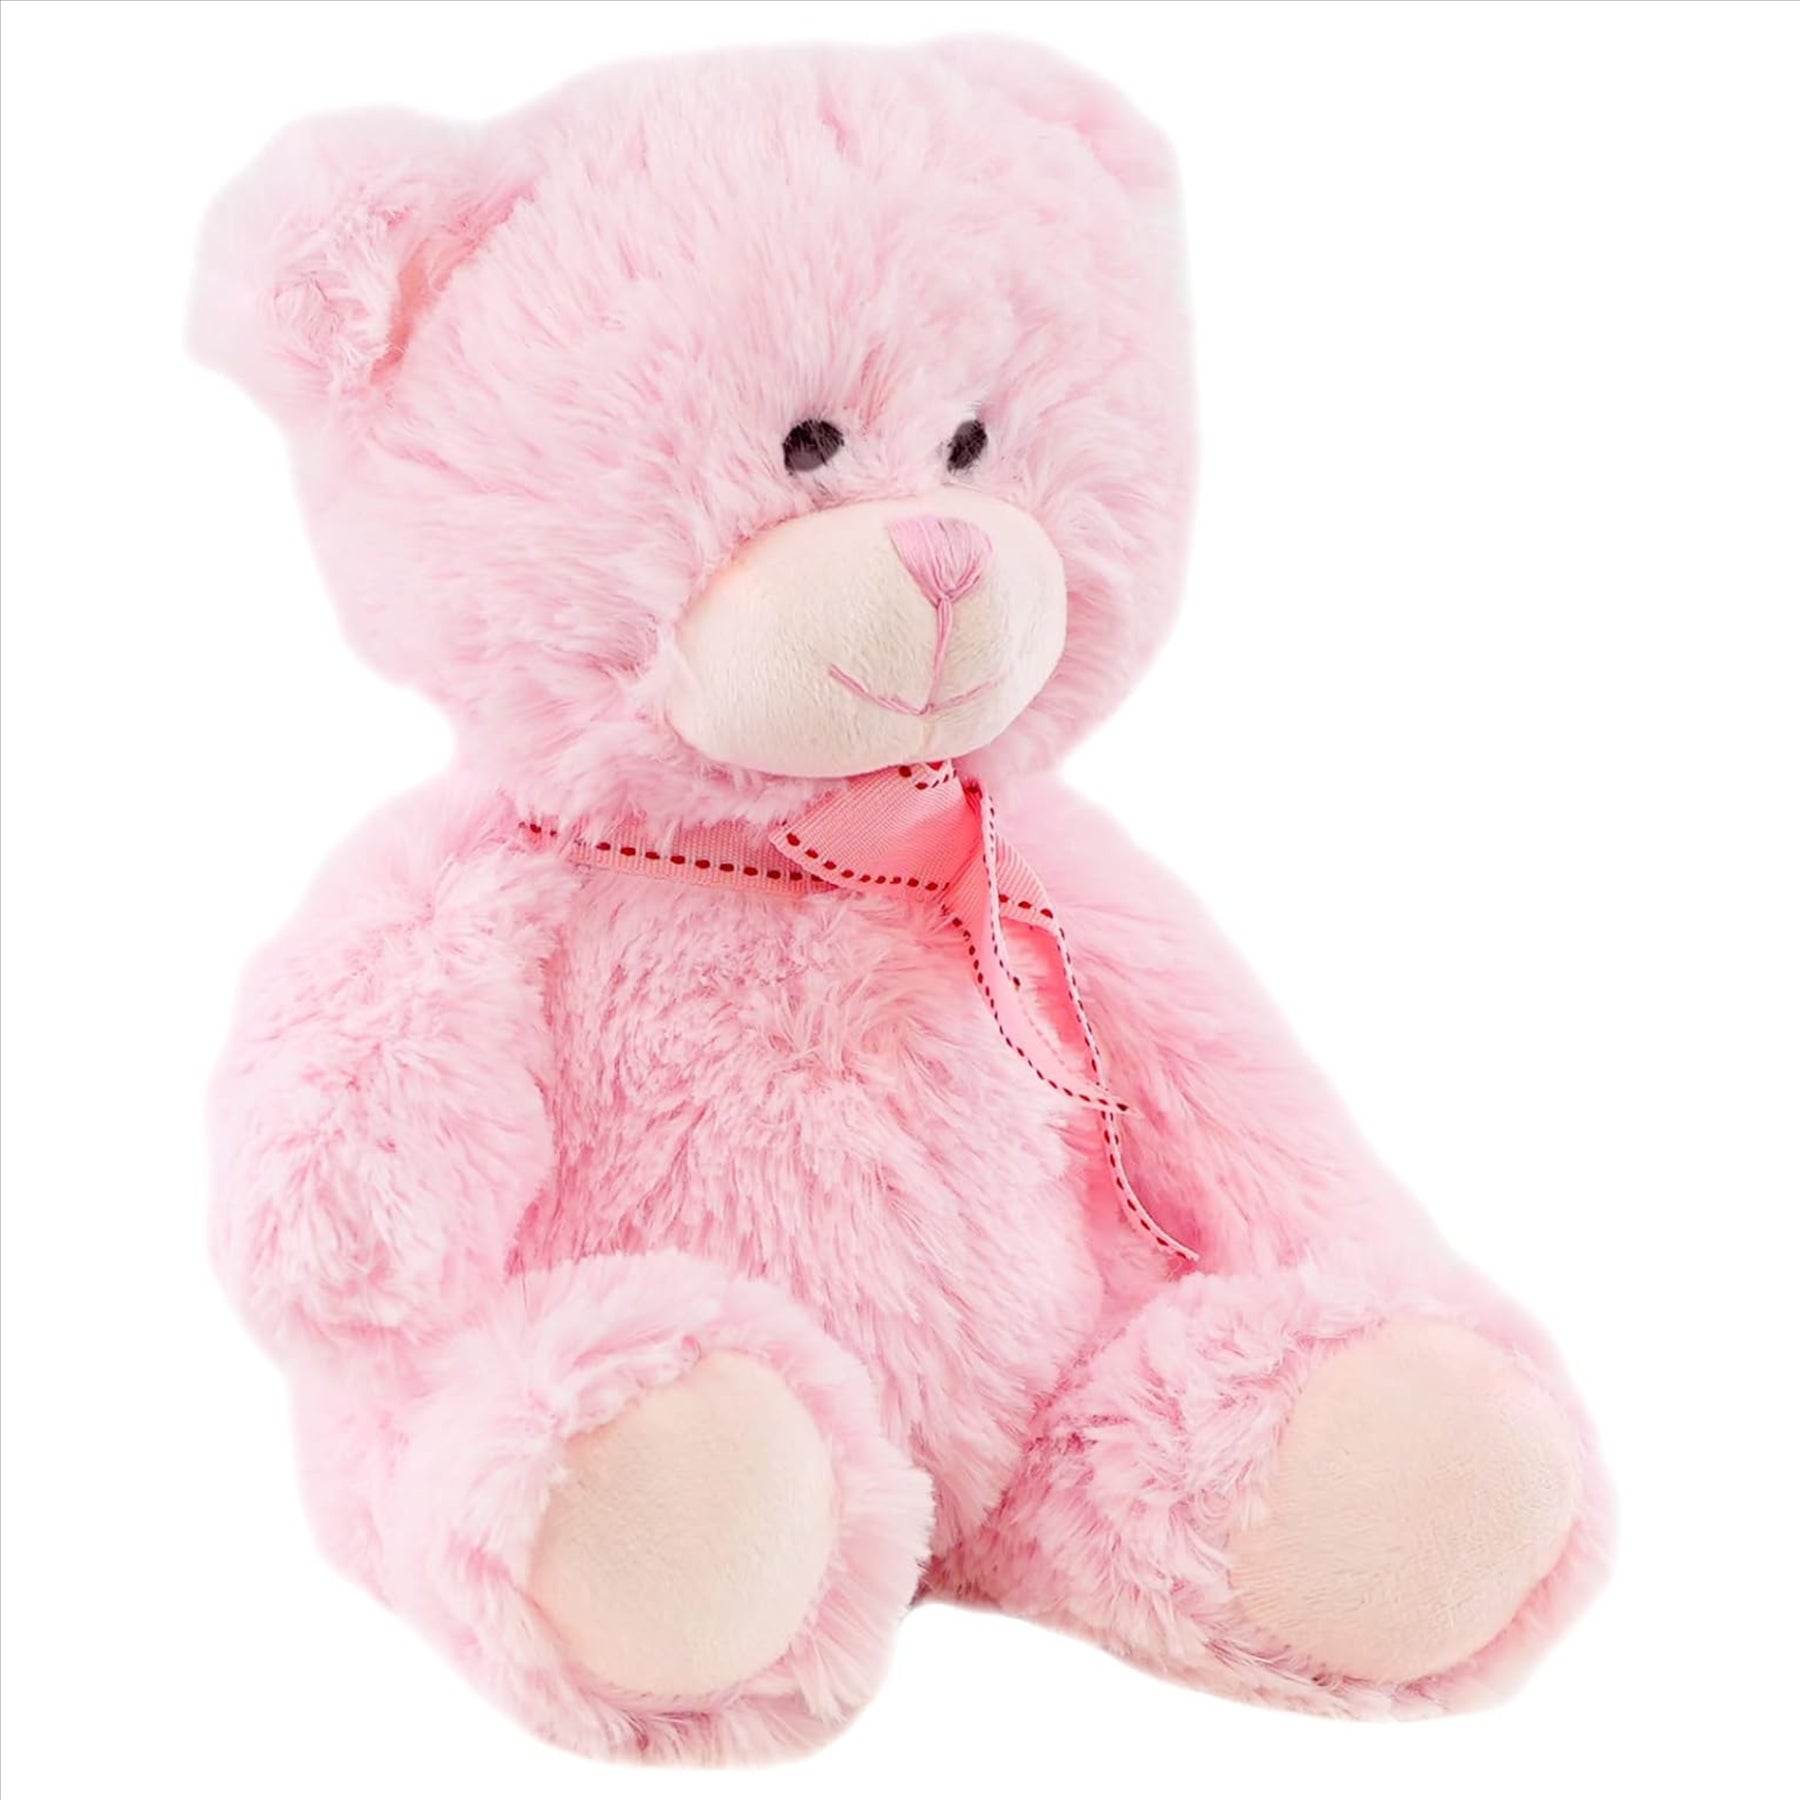 The Magic Toy Shop Soft Toy Plush Teddy Bear Soft Toy with Ribbon (Pink)